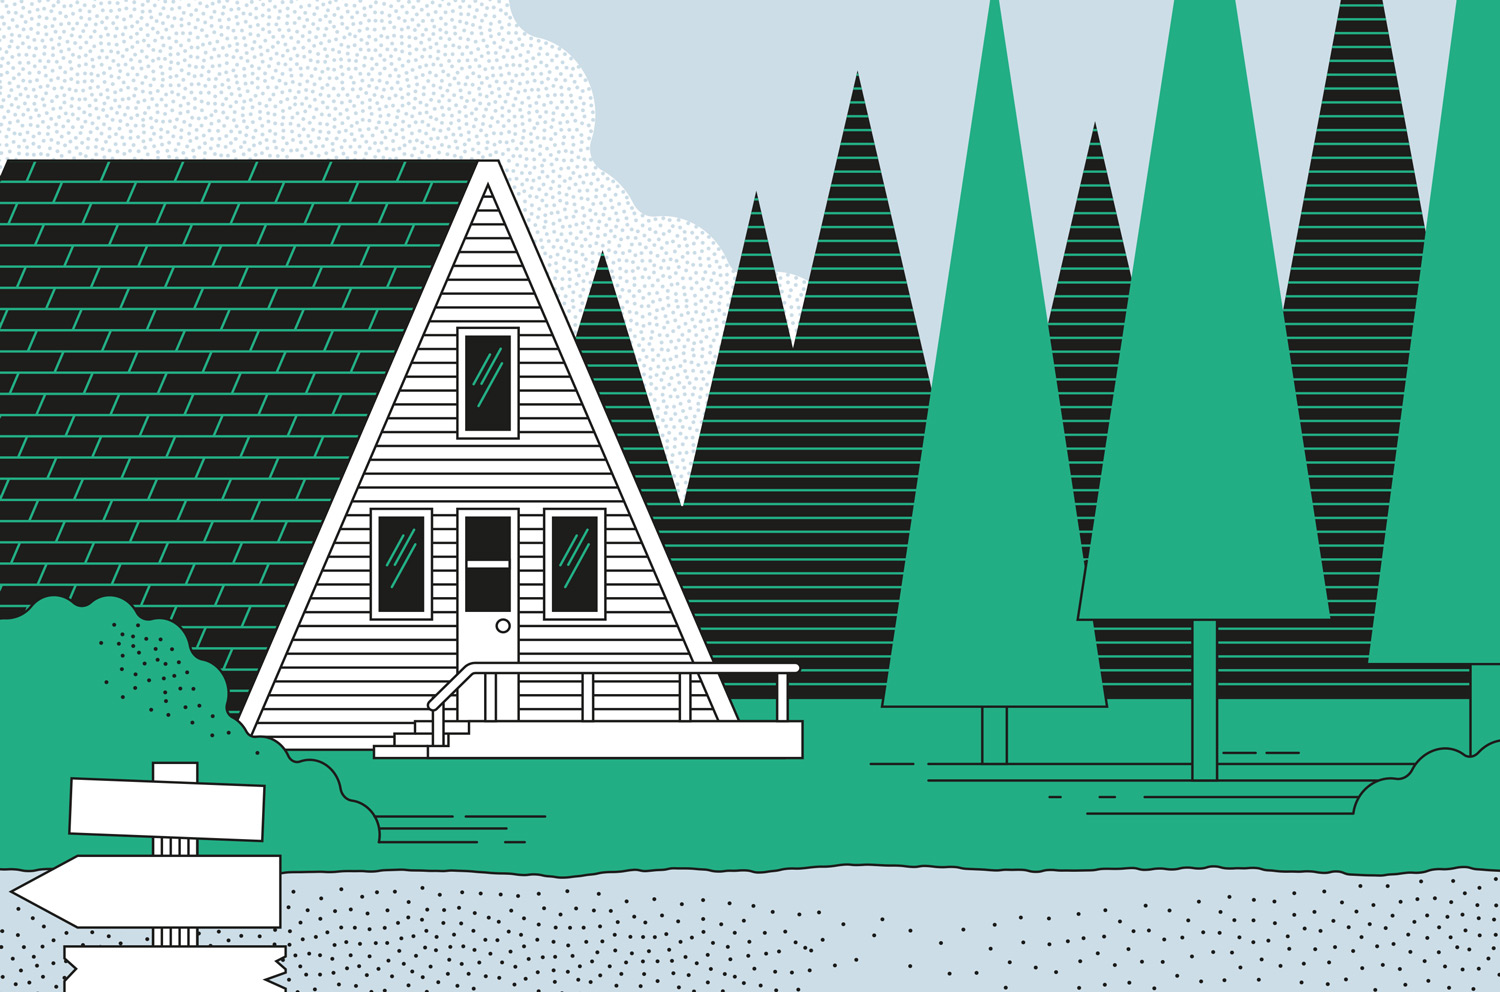 illustration of A-frame cottage in Canada with trees and gravel road